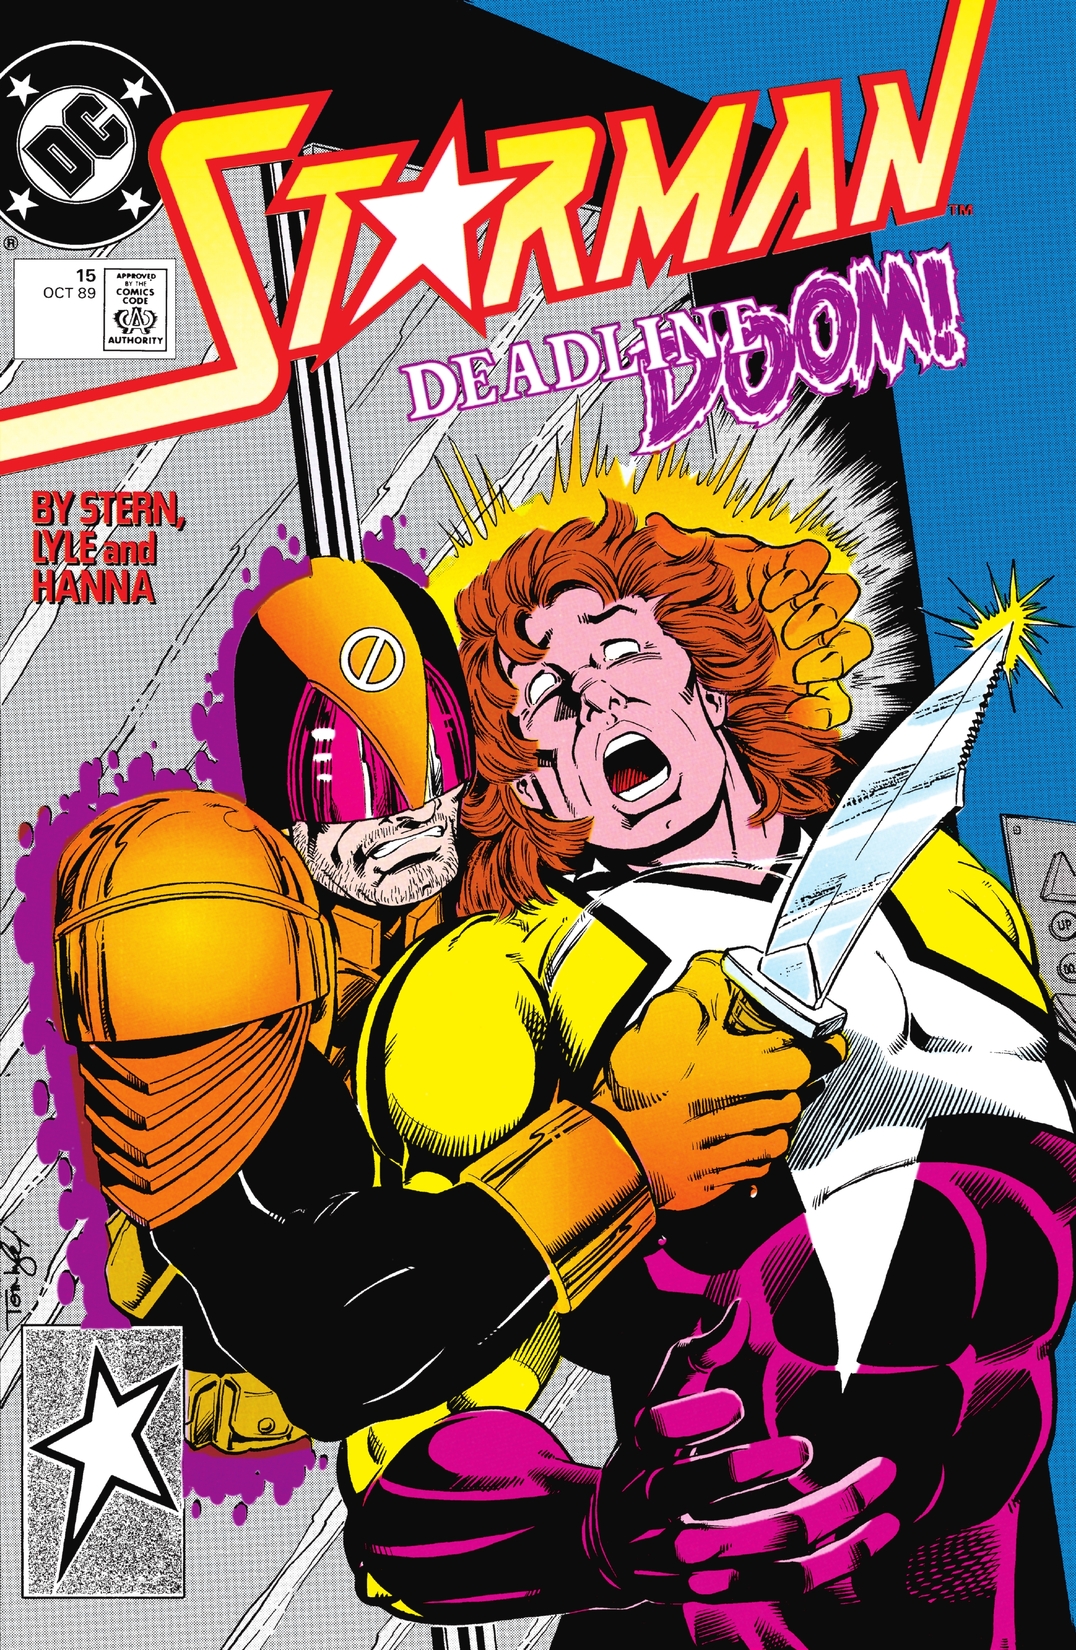 Starman (1988-1992) #15 preview images